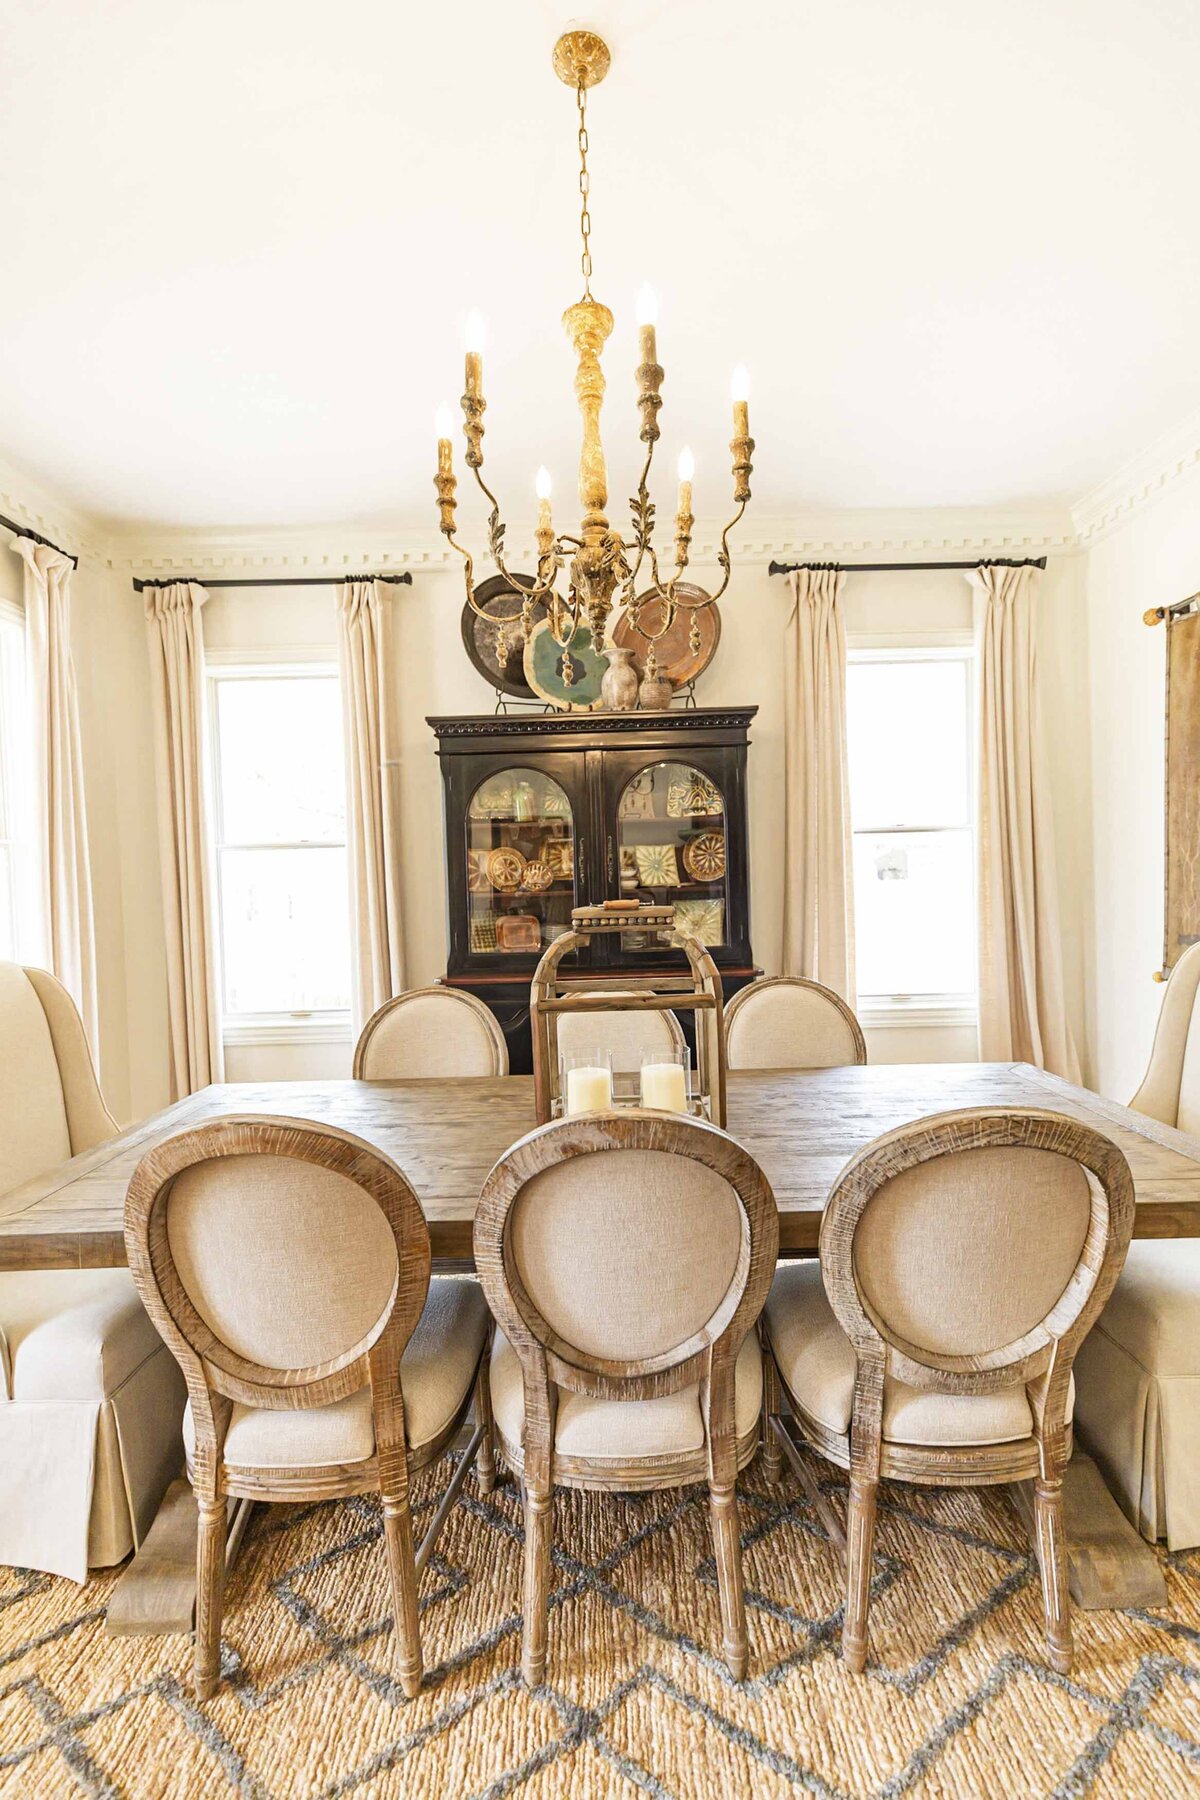 bright-dining-room-decor-textures-character-crown-molding21